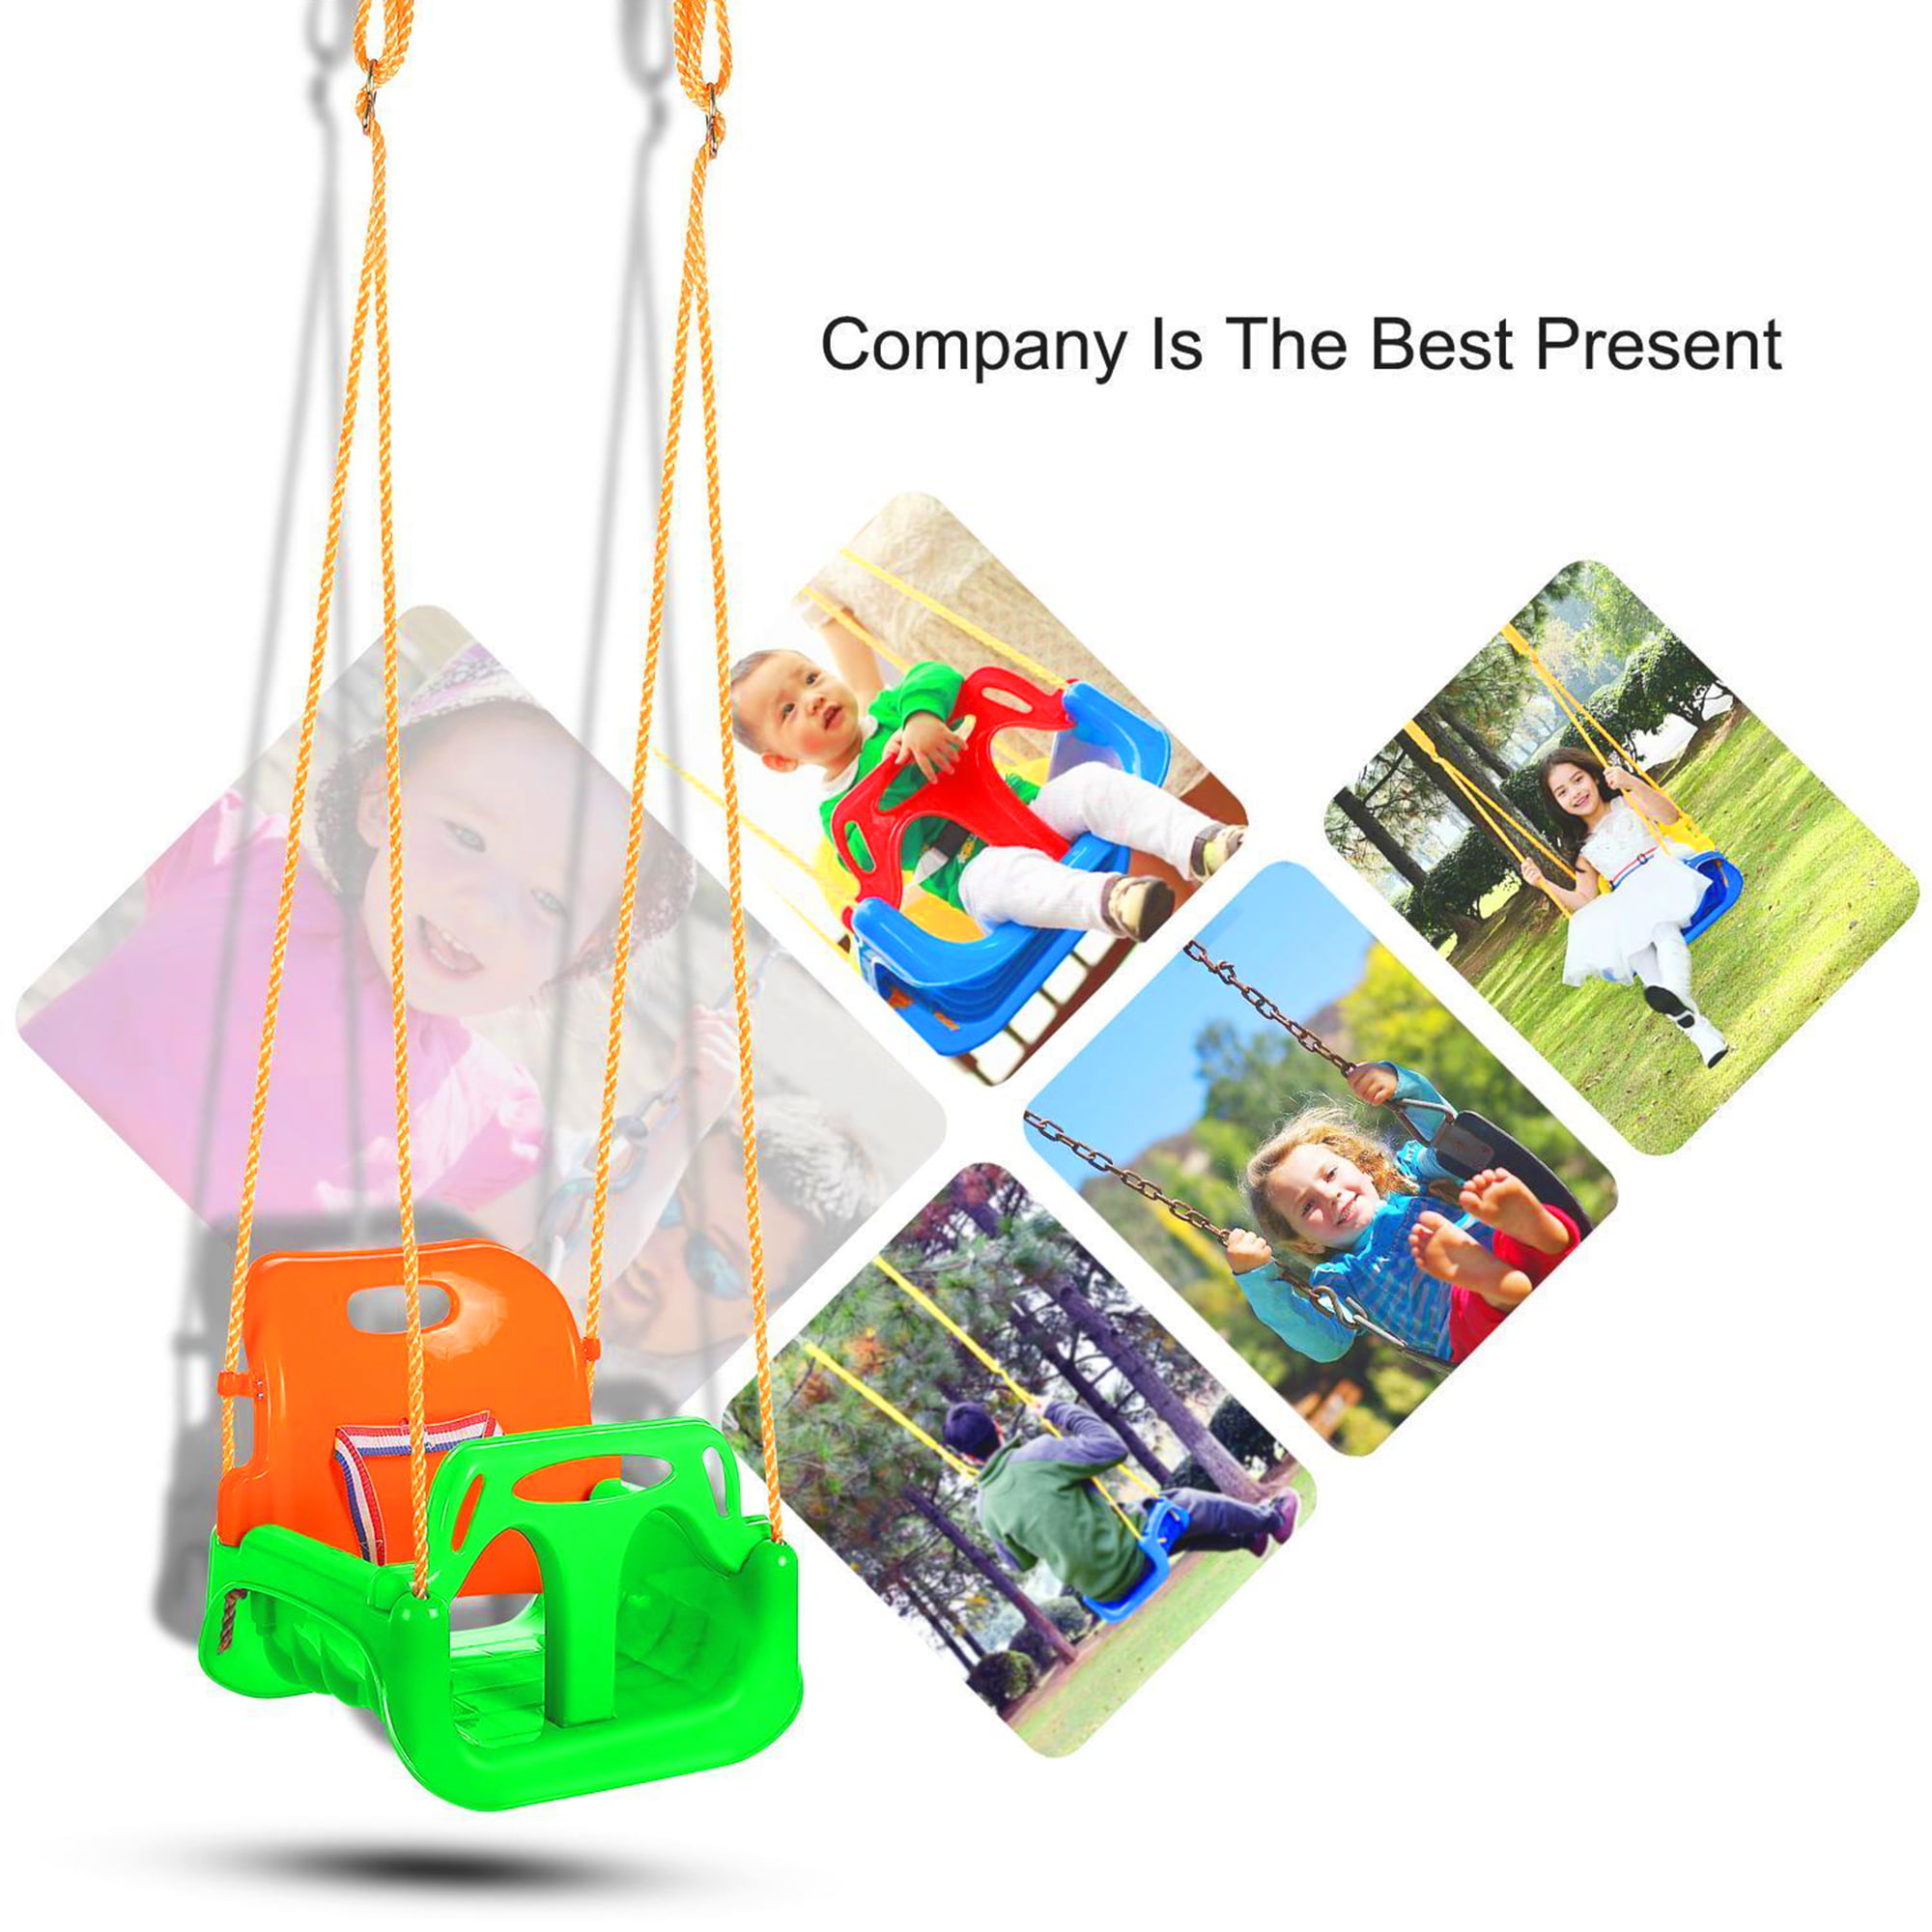 Details about   Full Bucket Swing for Toddler Seat Red Set Playground Outdoors Play Fun Kids TOP